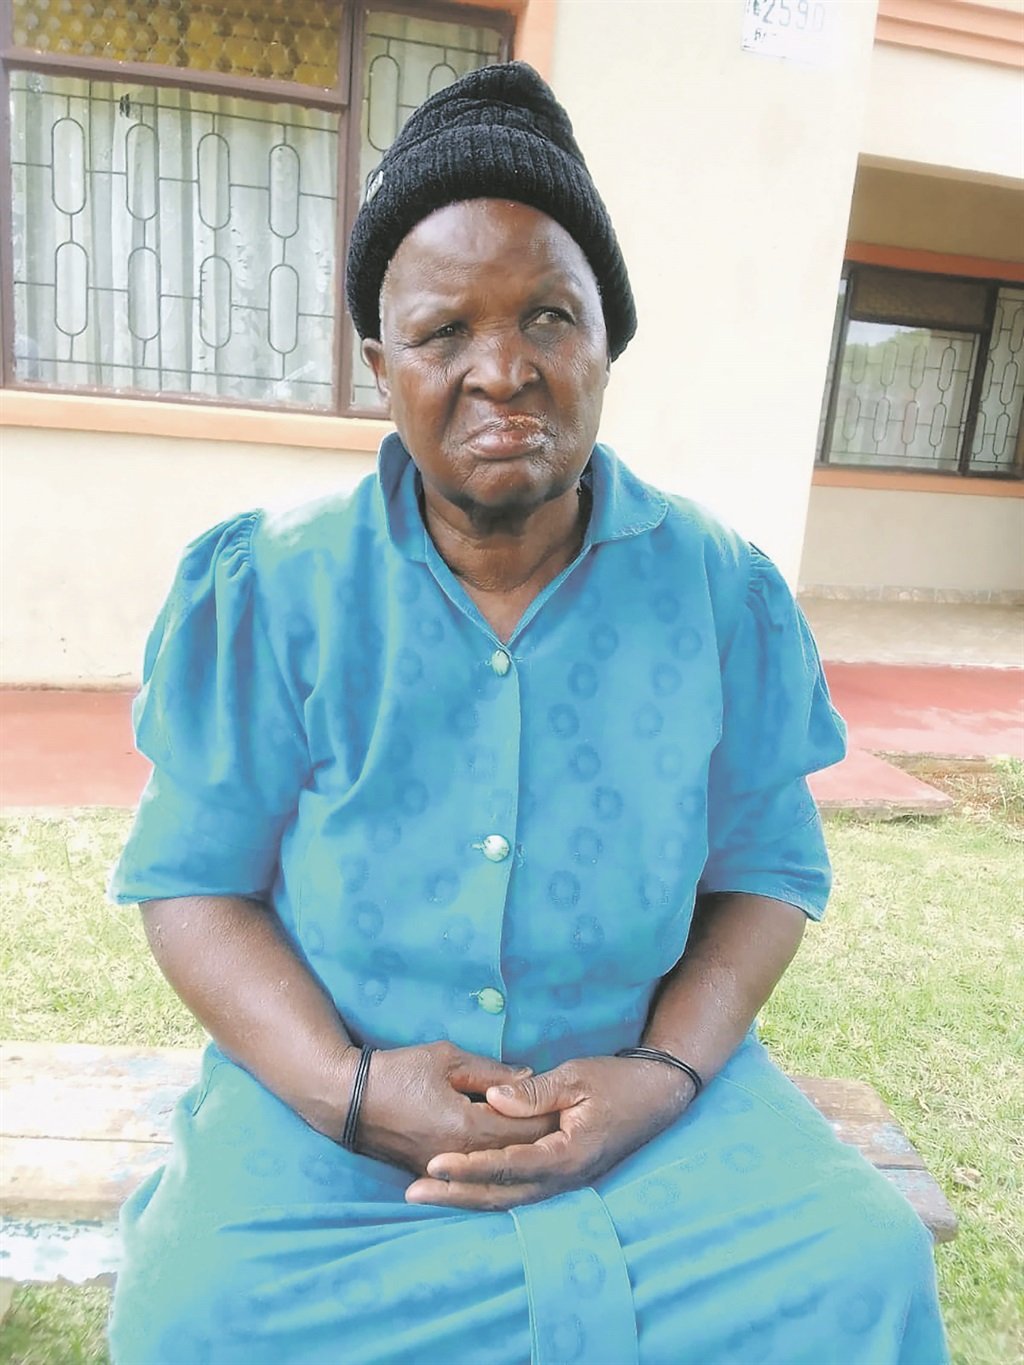 Annah Kekana (80) from Ramogodi Village in North West was robbed of almost R61 000 on Wednesday, 14 December by two criminals at her home who struggled and beaten her on the mouth by thugs. Photo by Raymond Morare